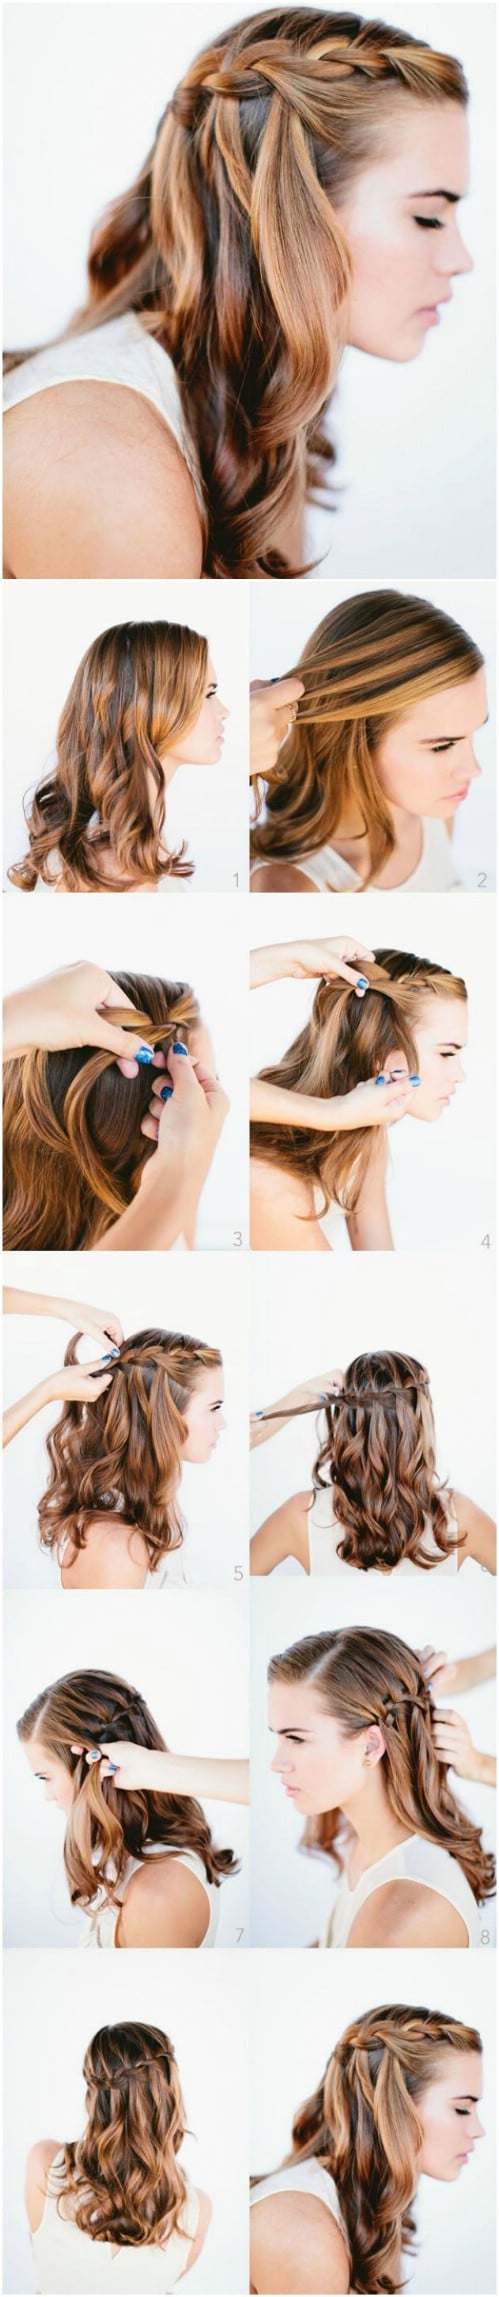 Hairstyling with NuMe - Waterfall Braid! - From My Vanity